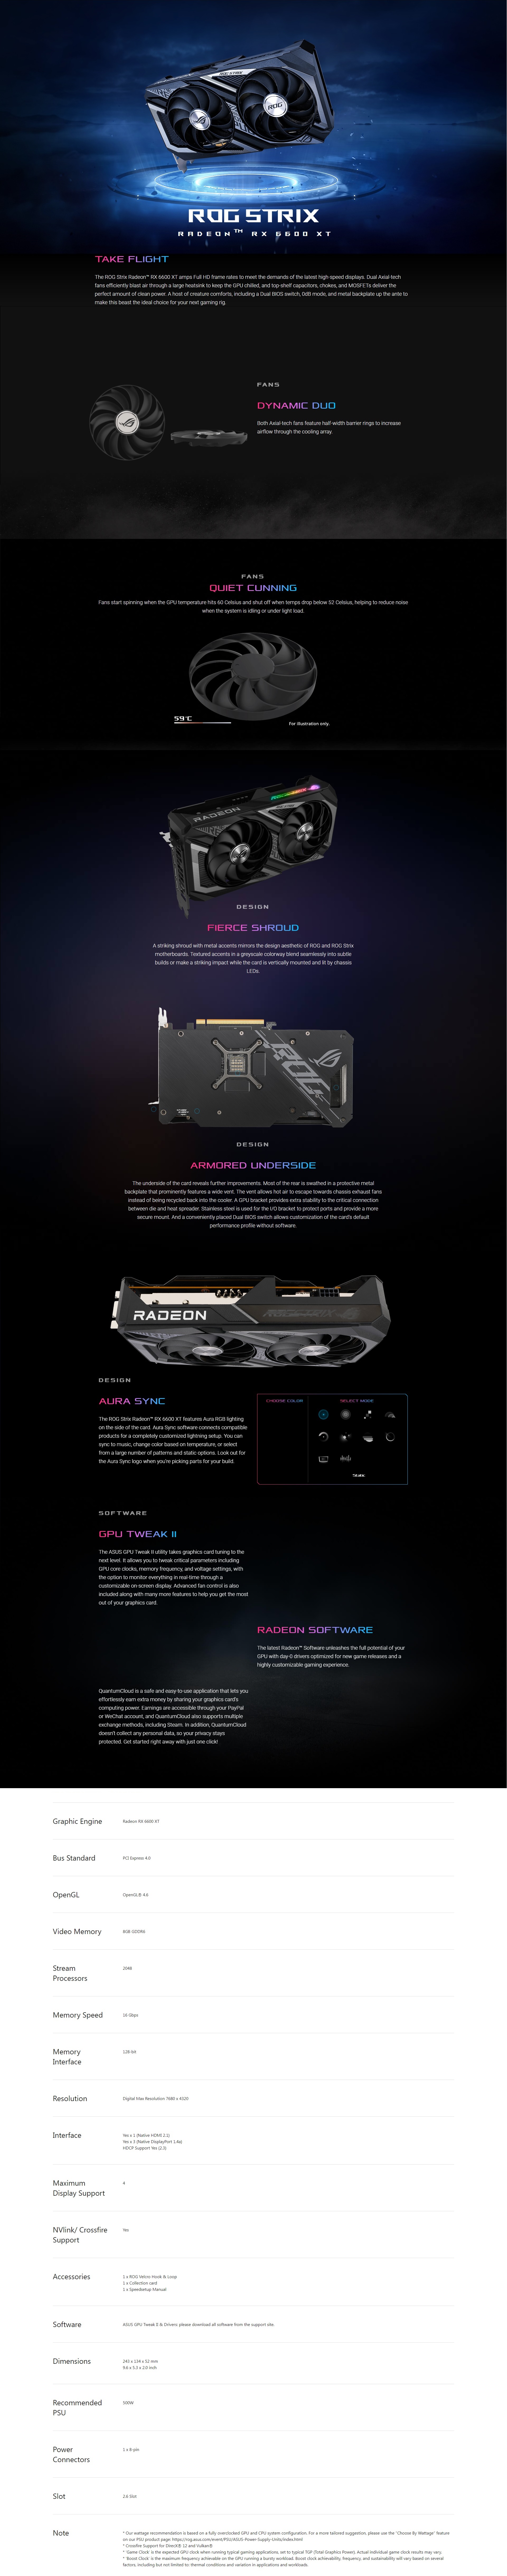 A large marketing image providing additional information about the product ASUS Radeon RX 6600 XT ROG Strix OC 8GB GDDR6 - Additional alt info not provided